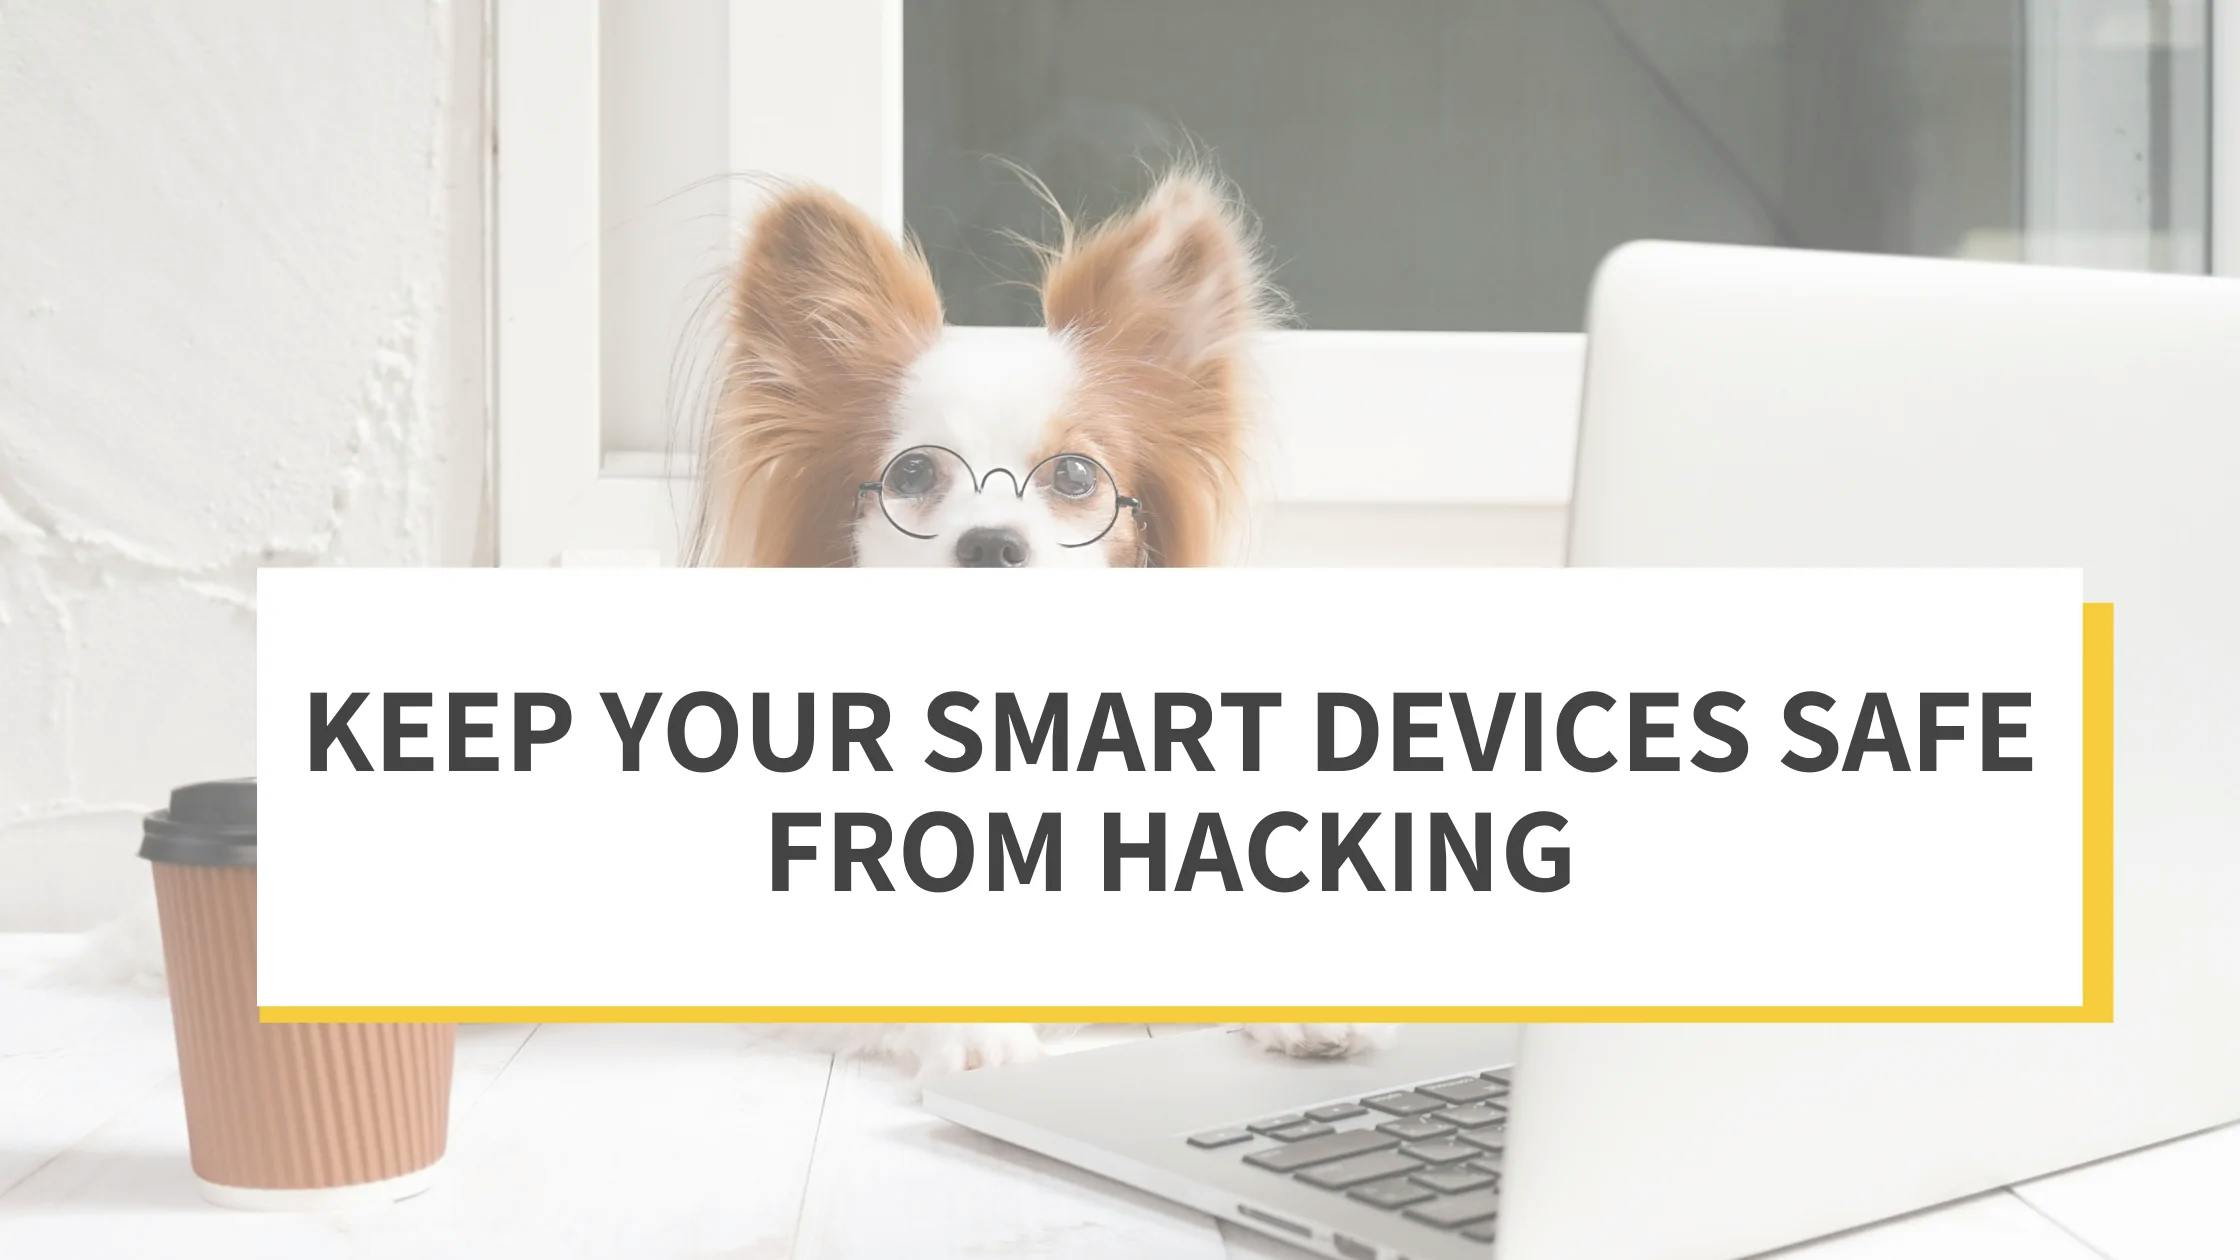 Keep Your Smart Devices Safe from Hacking